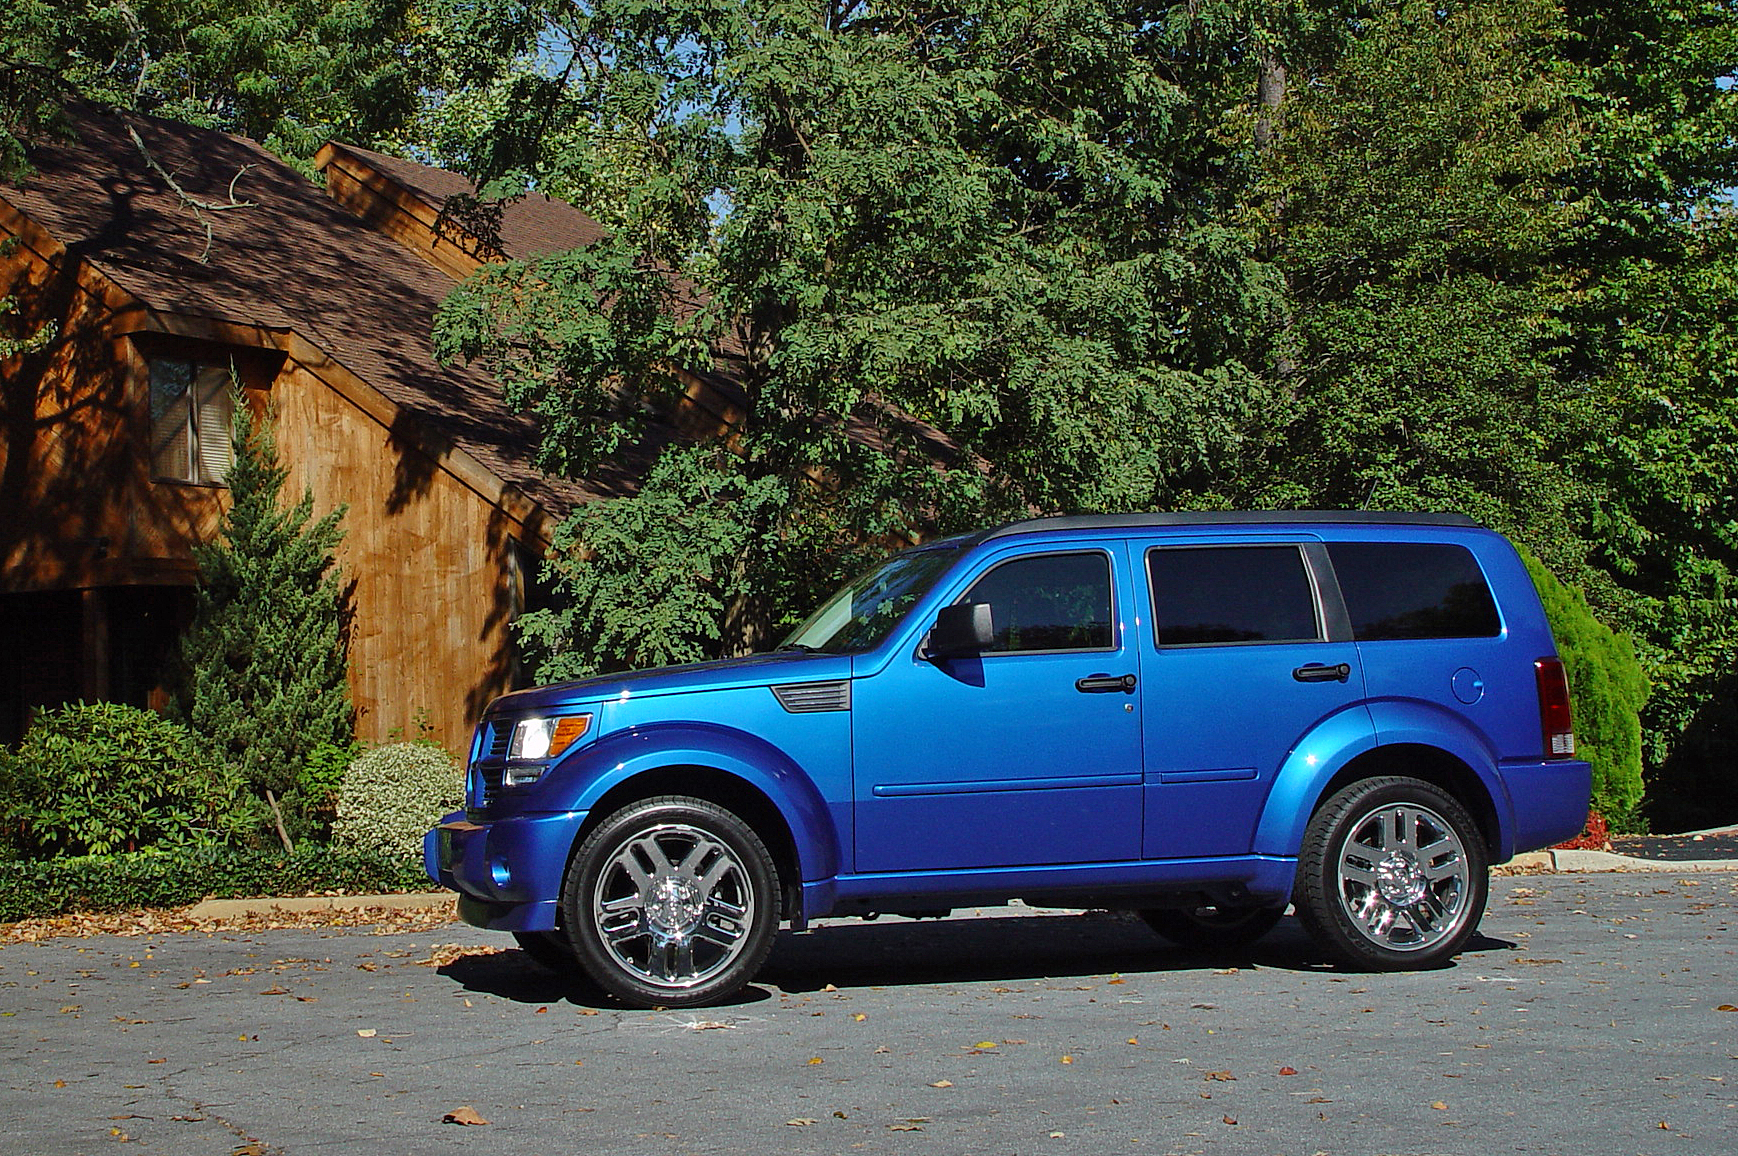 Band Wagon: 2007 Dodge Nitro R/T | Miscellaneous Blog & Discussions at .